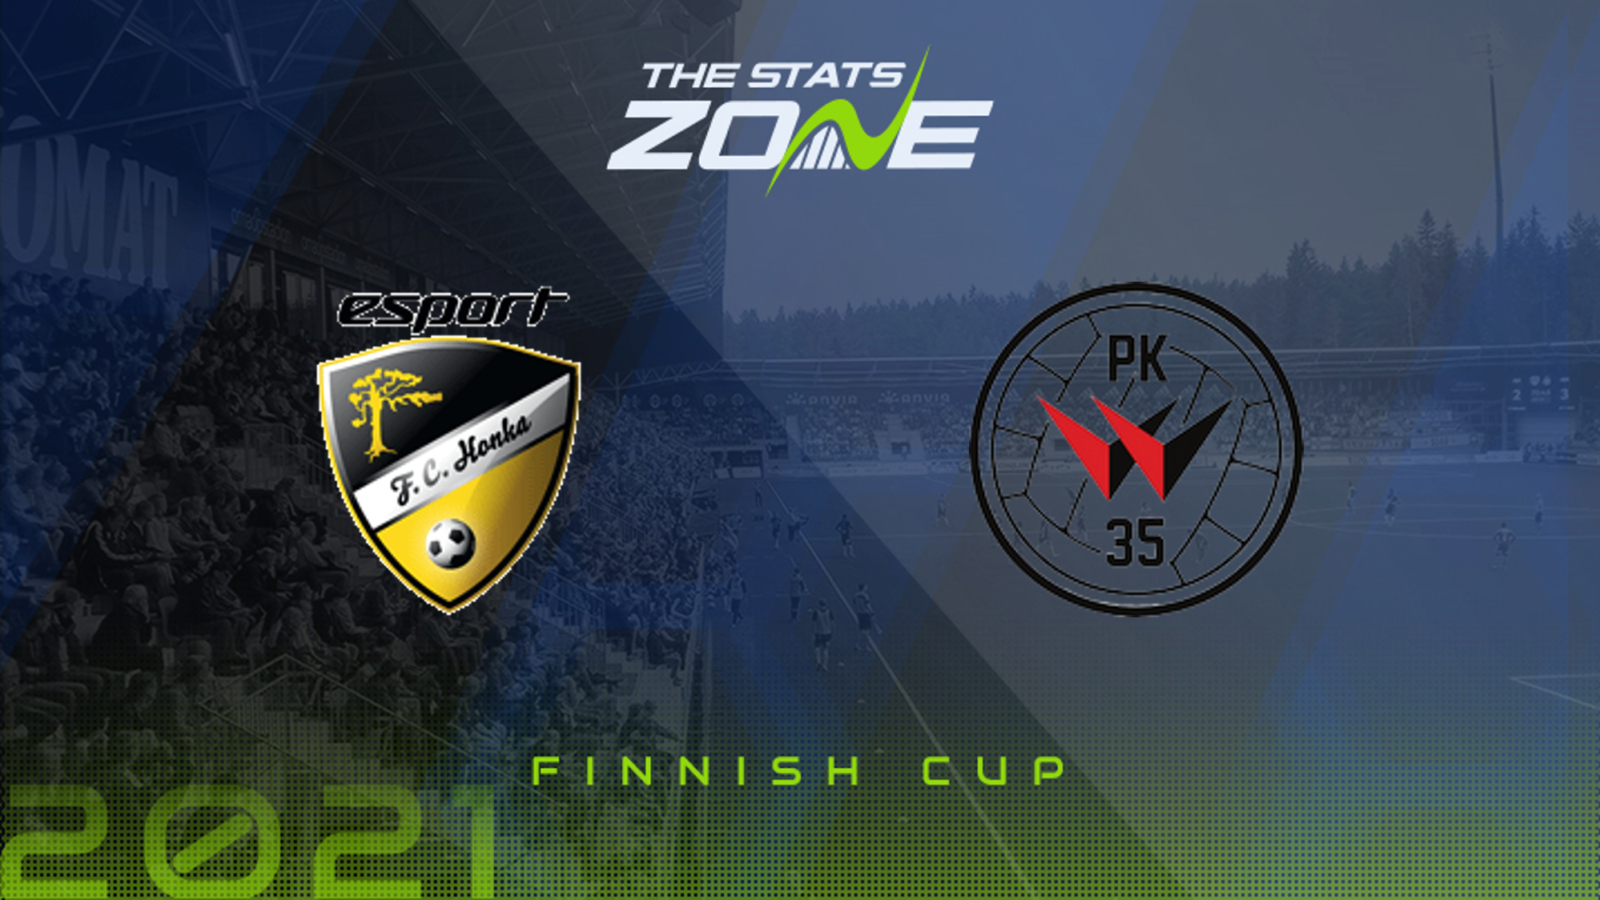 21 Finnish Cup Honka Vs Pk 35 Preview Prediction The Stats Zone